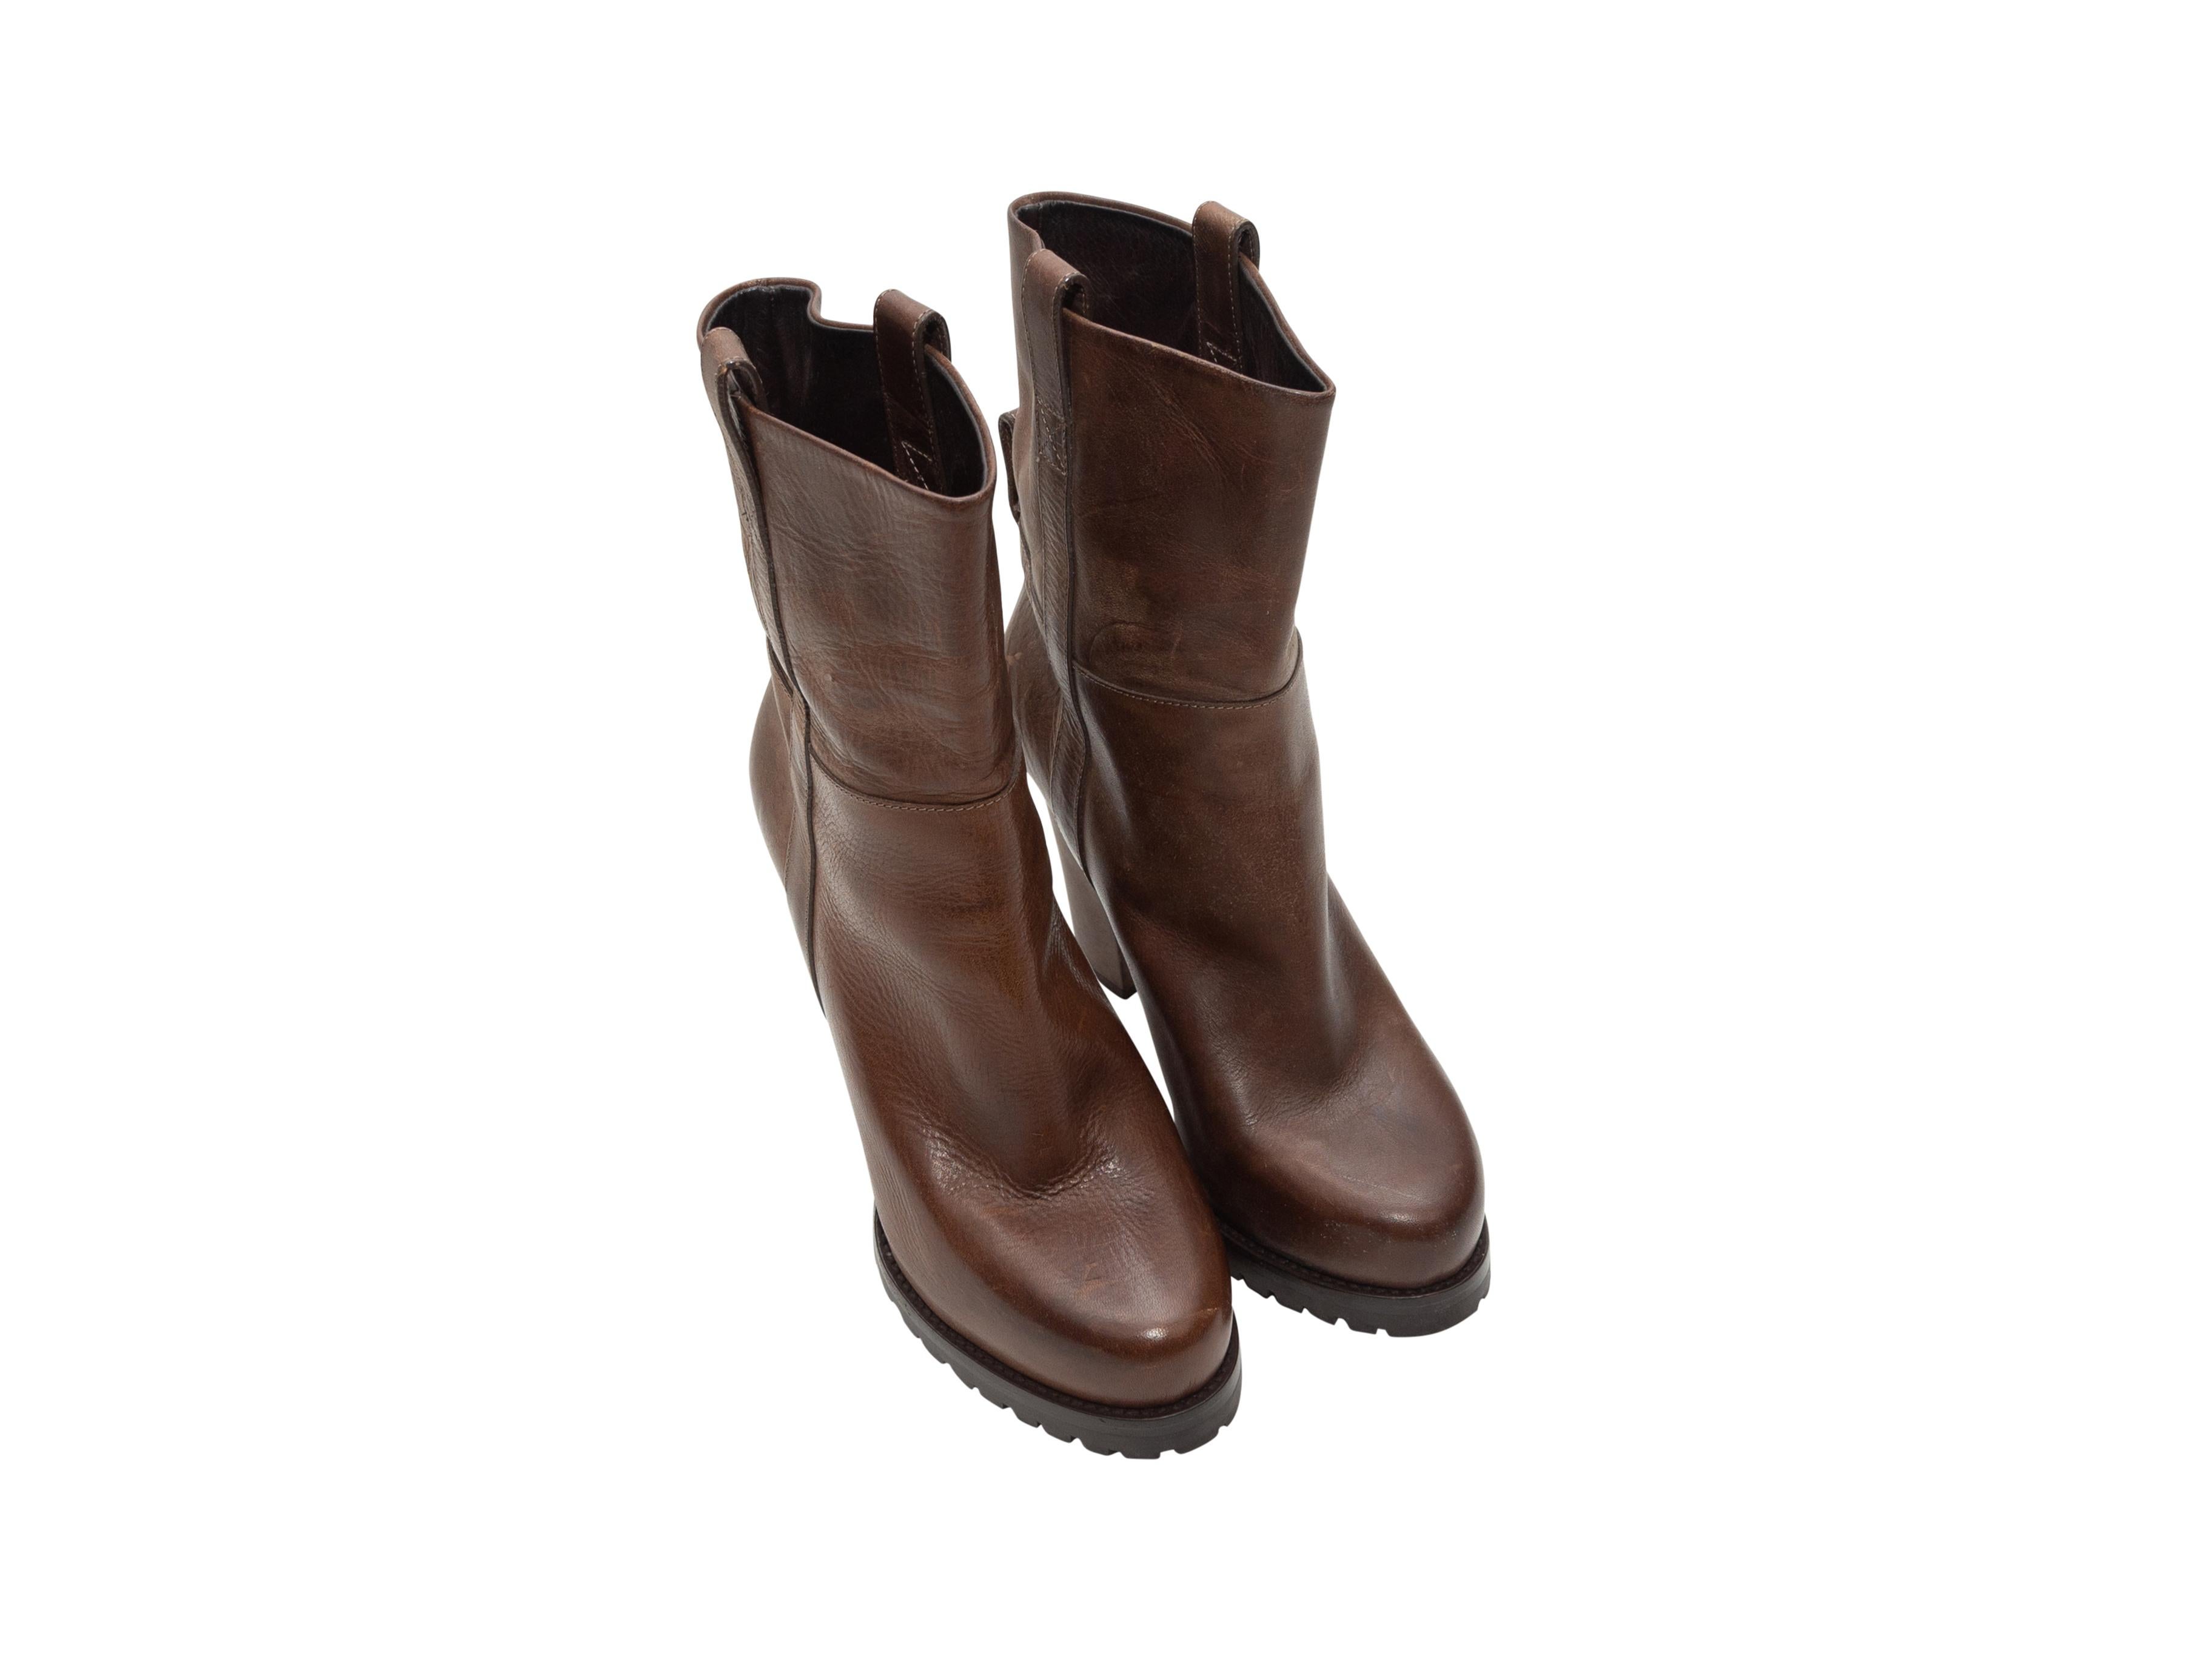 Product details: Brown leather mid-calf round-toe heeled boots by Brunello Cucinelli. Covered heels. Designer size 39. 4.5